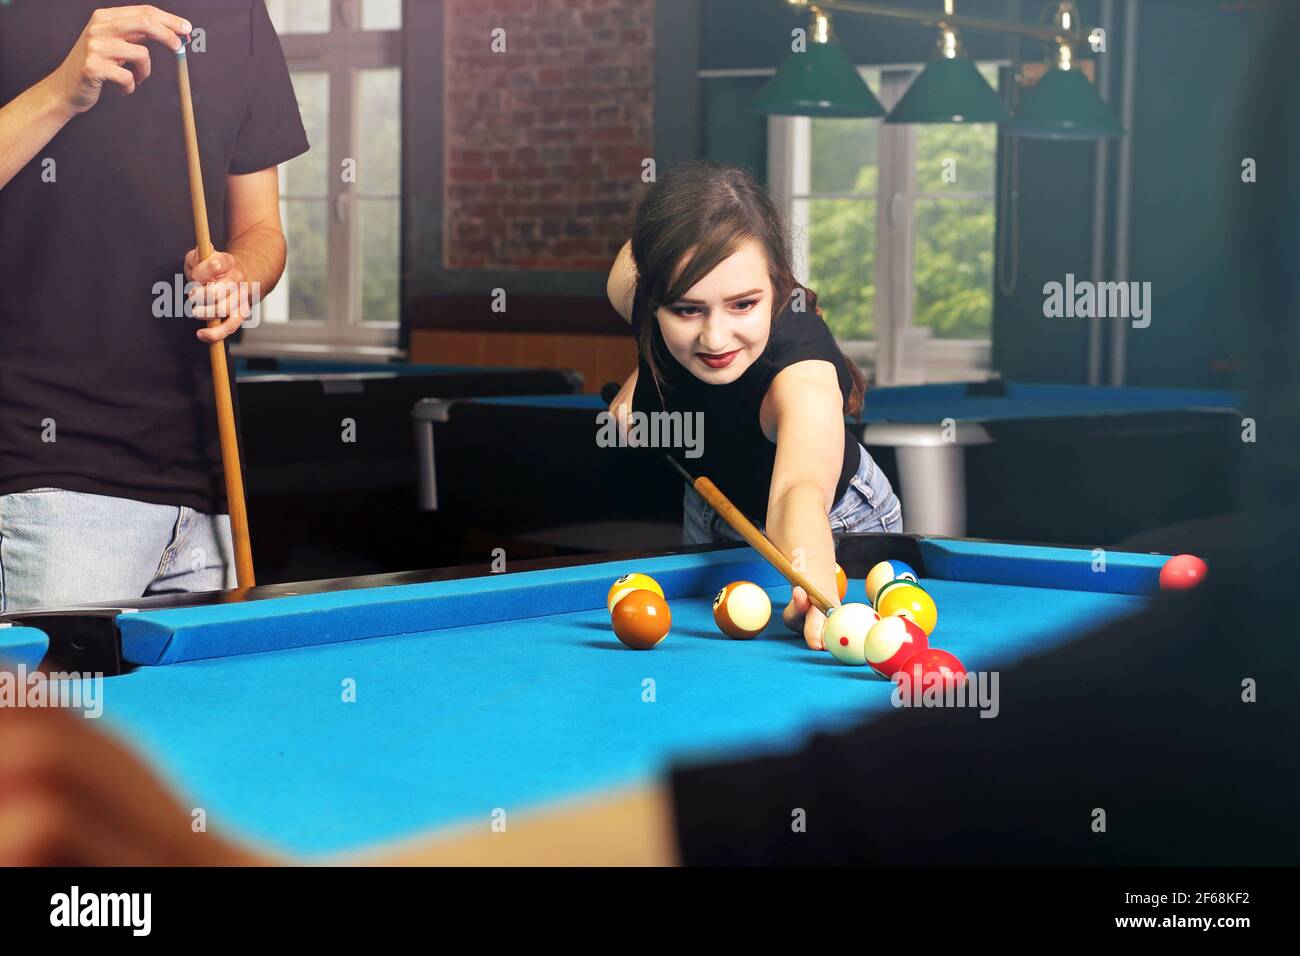 Playing billiards, the player sets the balls on the pool table. Stock Photo